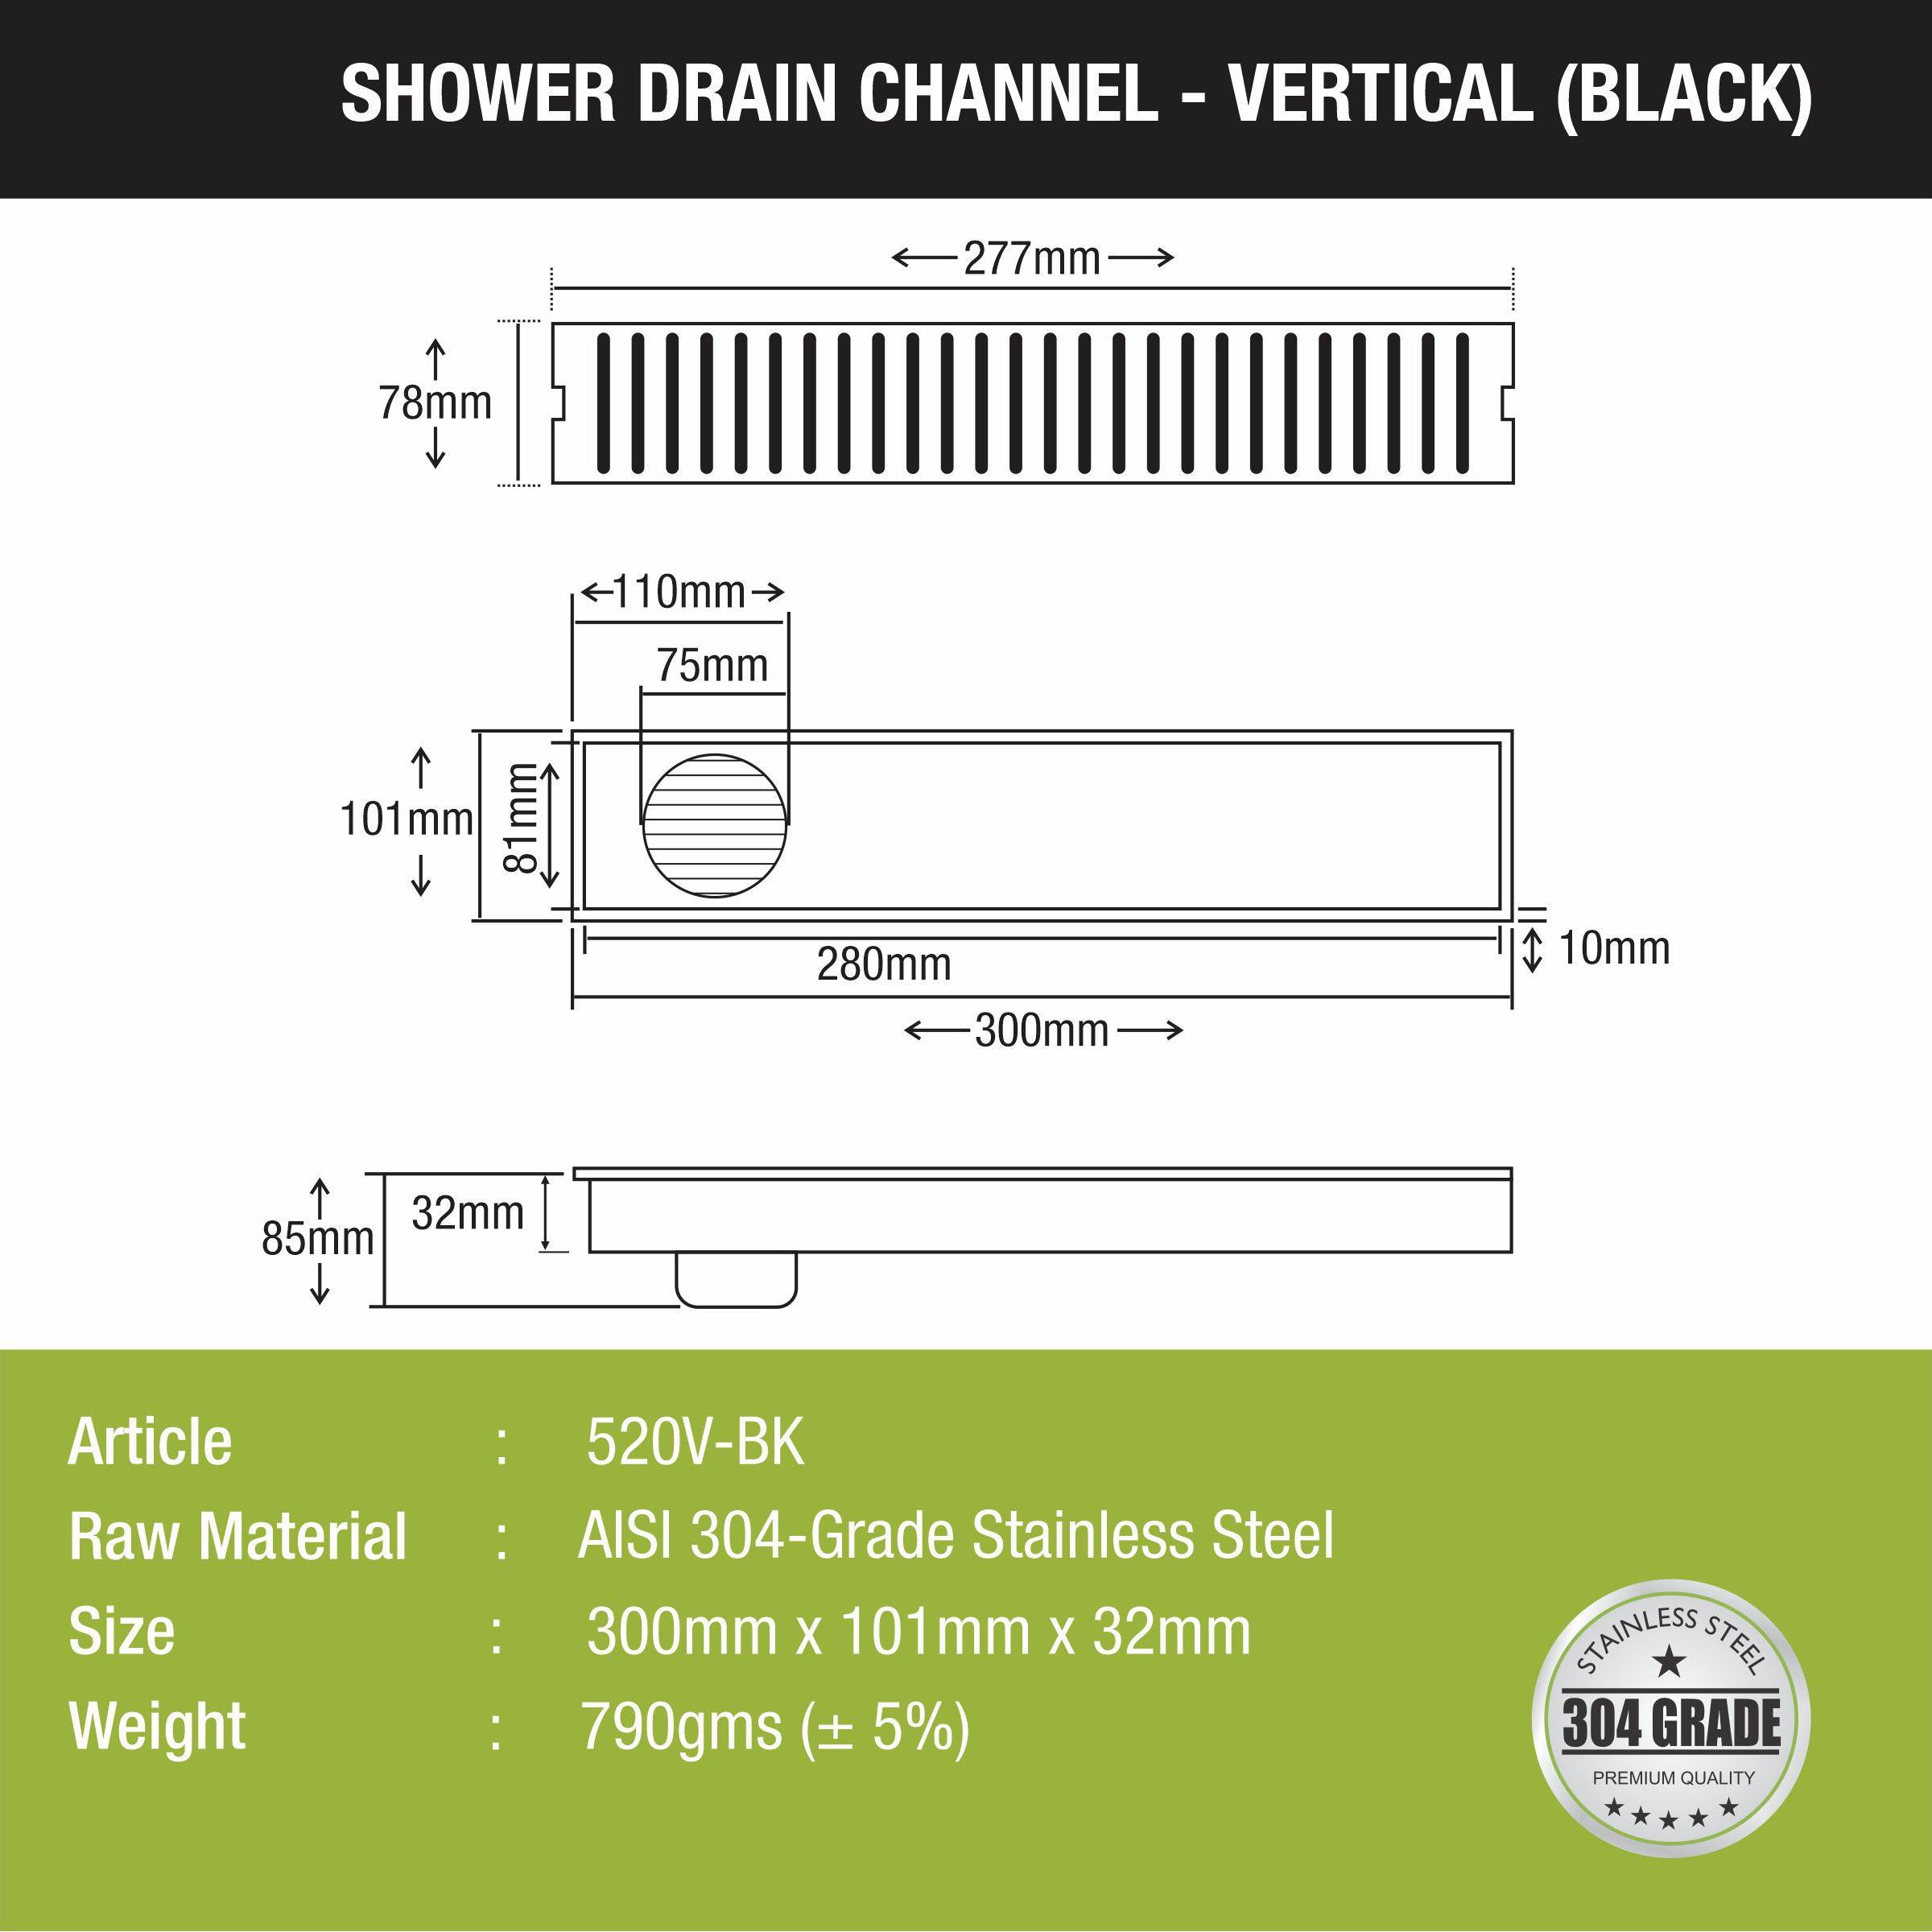 Vertical Shower Drain Channel - Black (12 x 4 Inches)  size and measurement